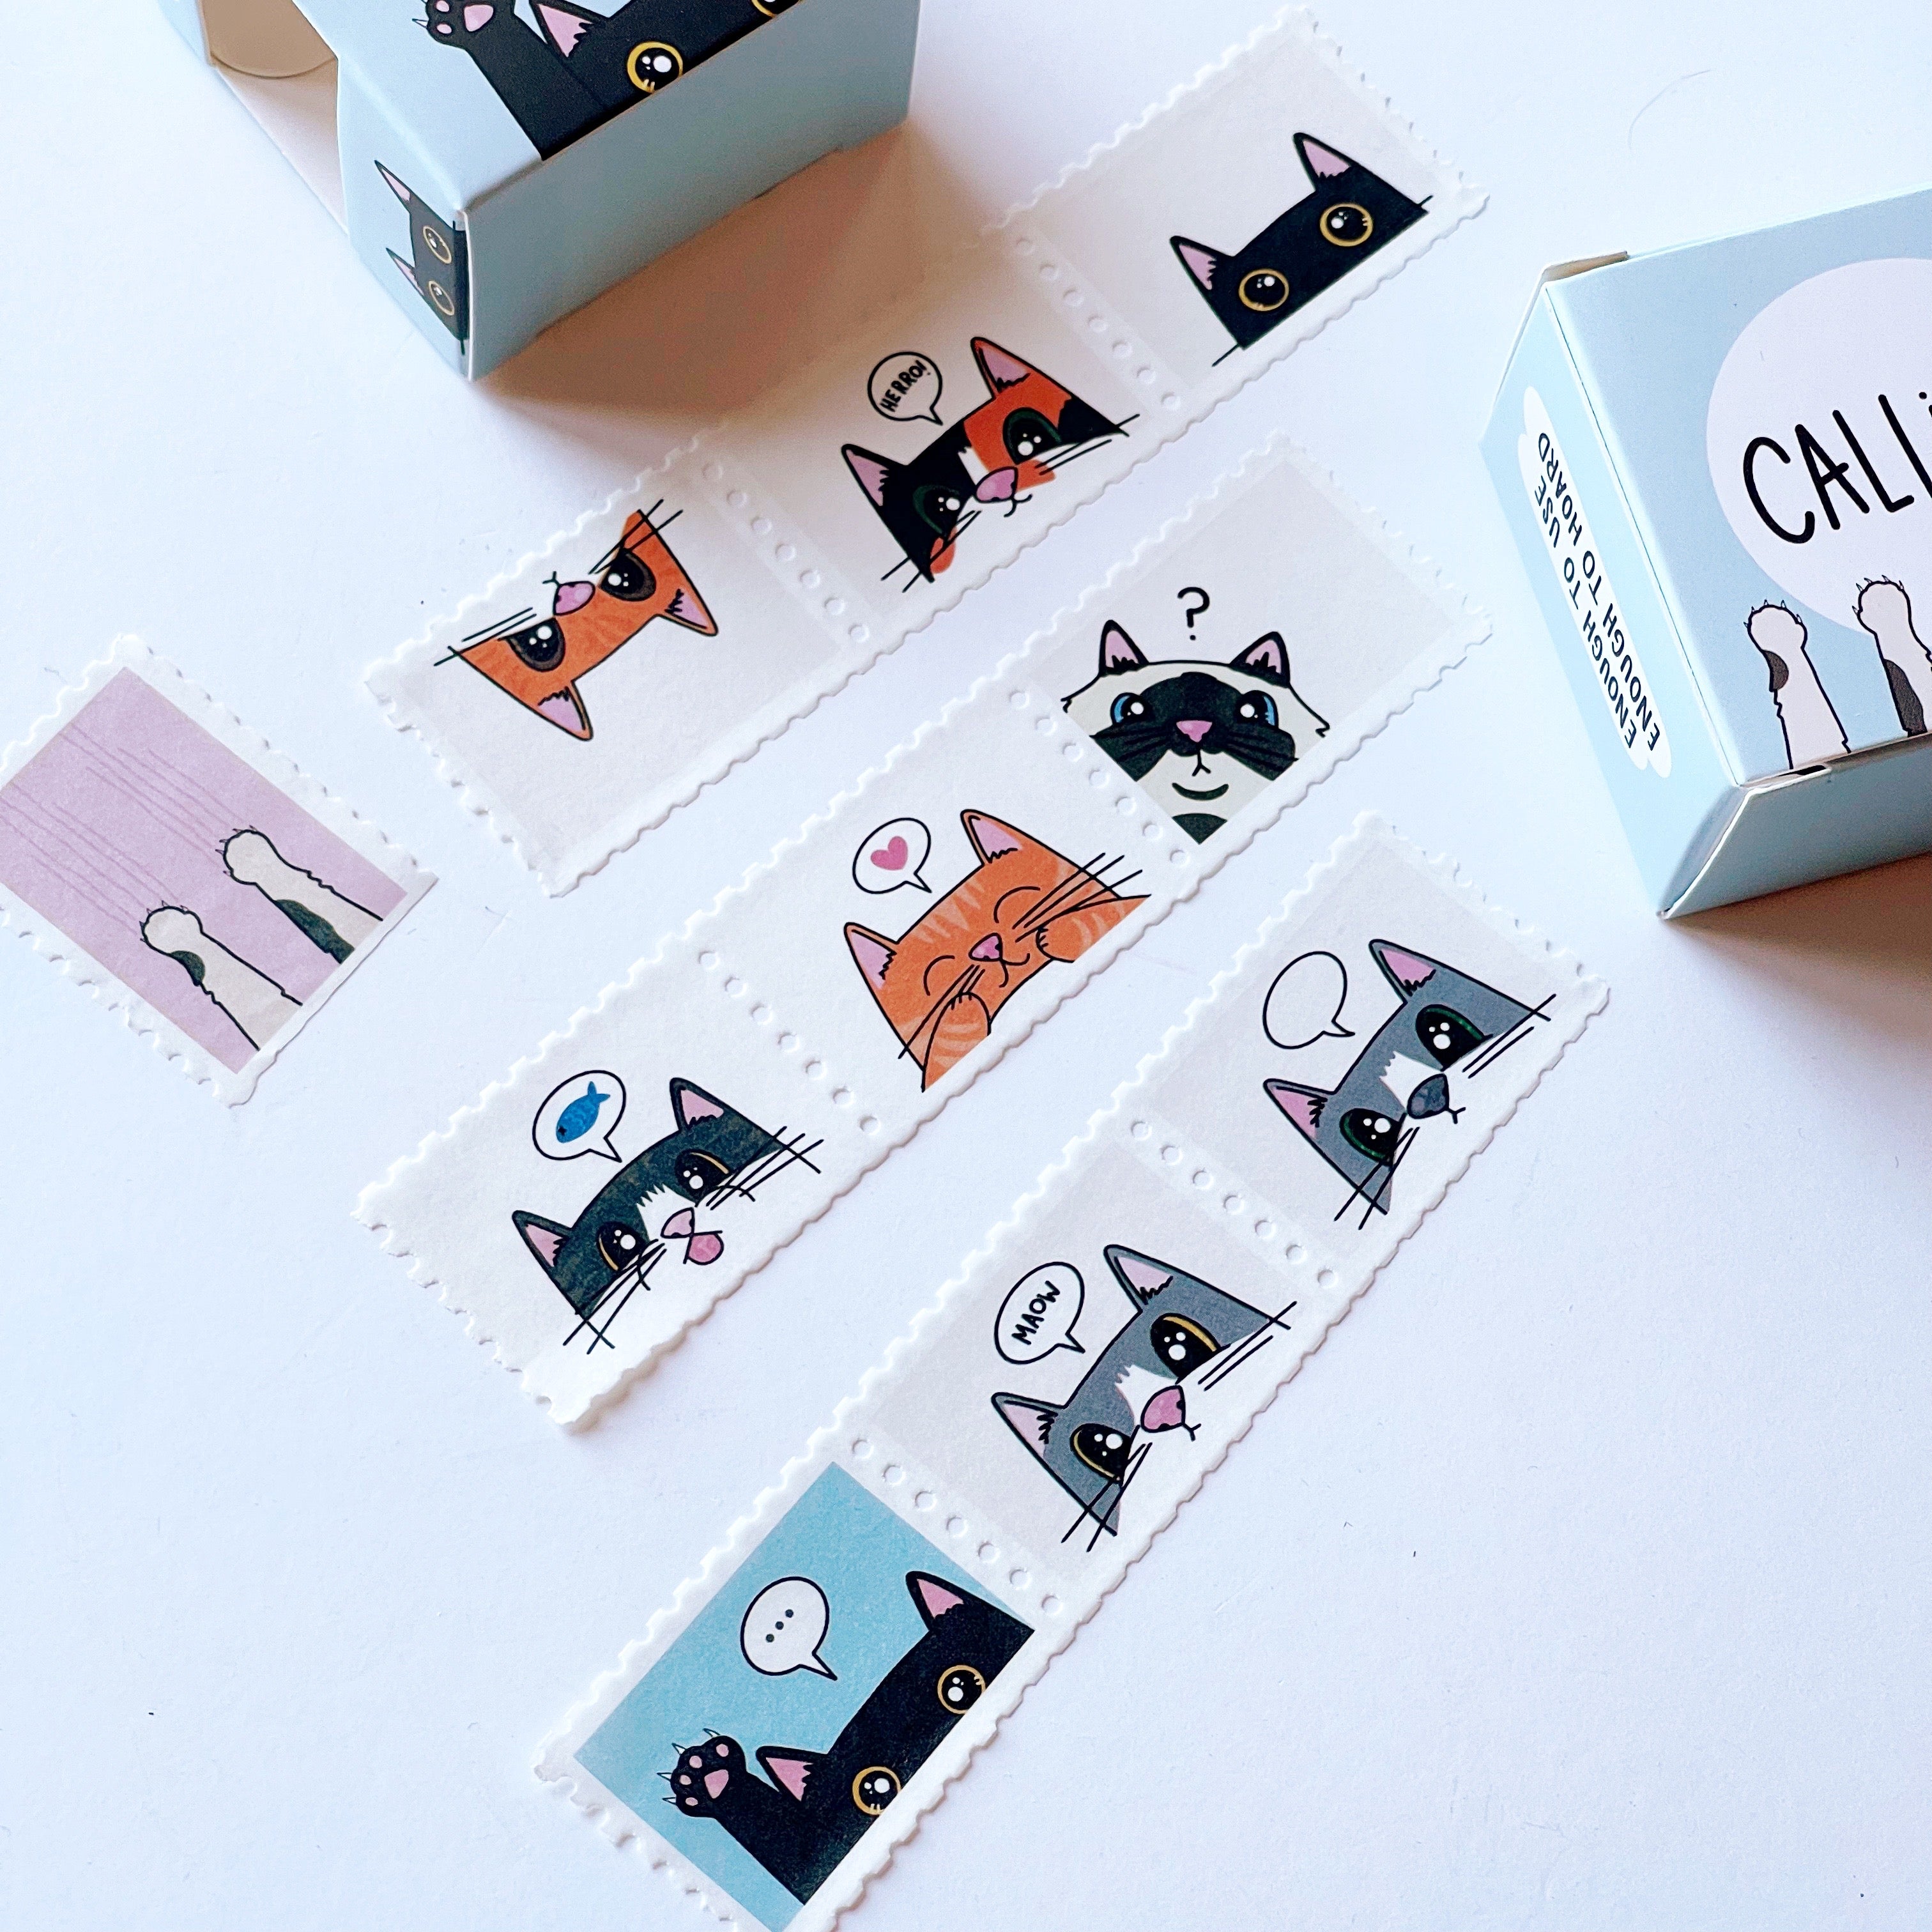 Image of stamp Washi tape with images of cats faces from the nose up with word bubbles with black text says, "meow" or has images of fish, hearts or "...".